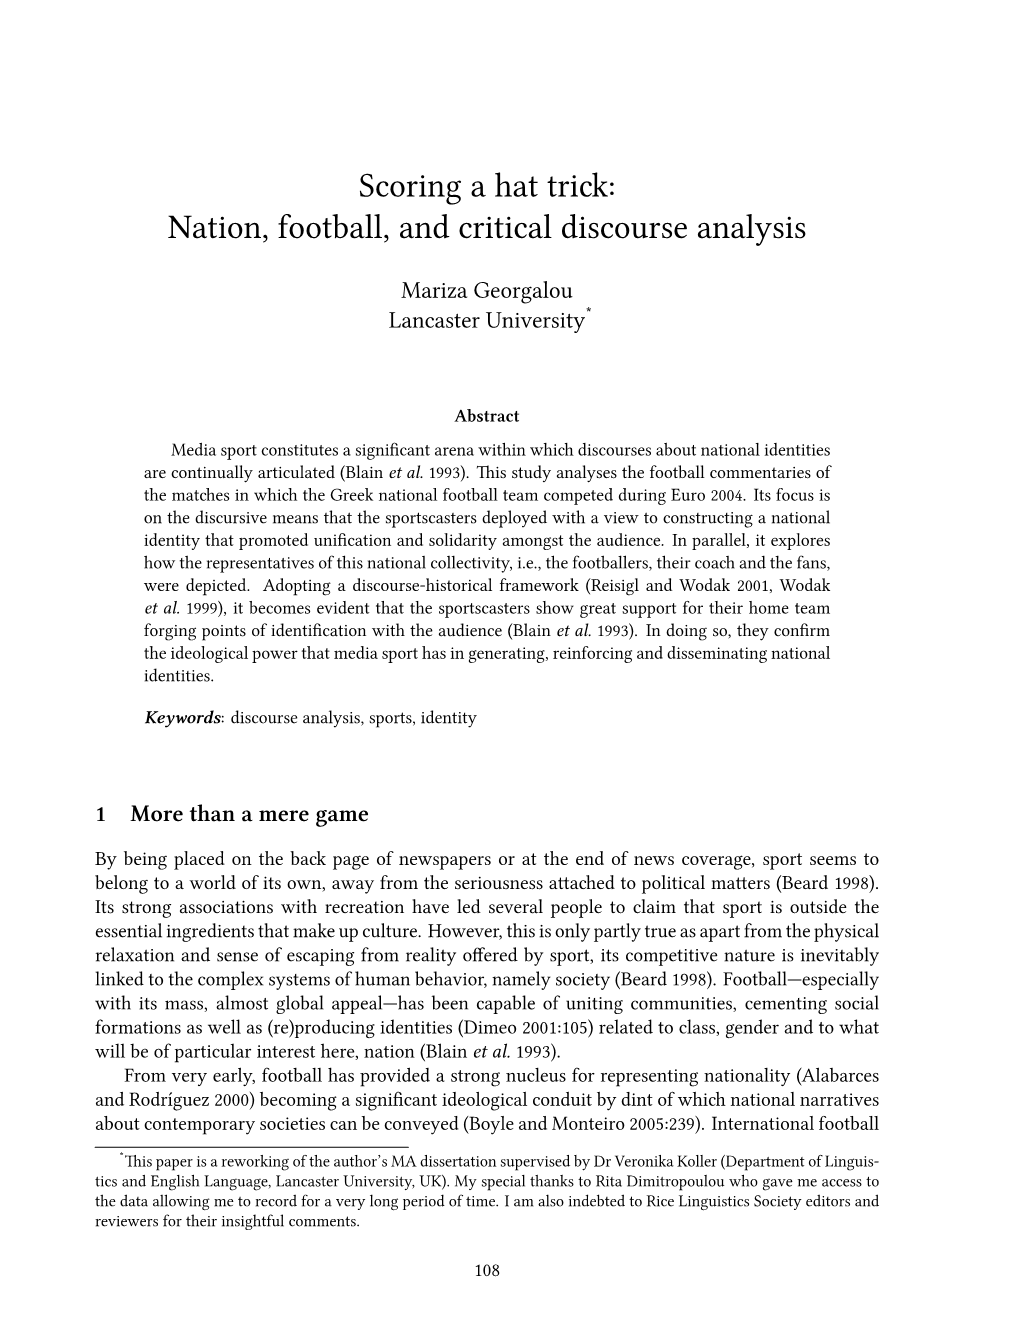 Nation, Football, and Critical Discourse Analysis